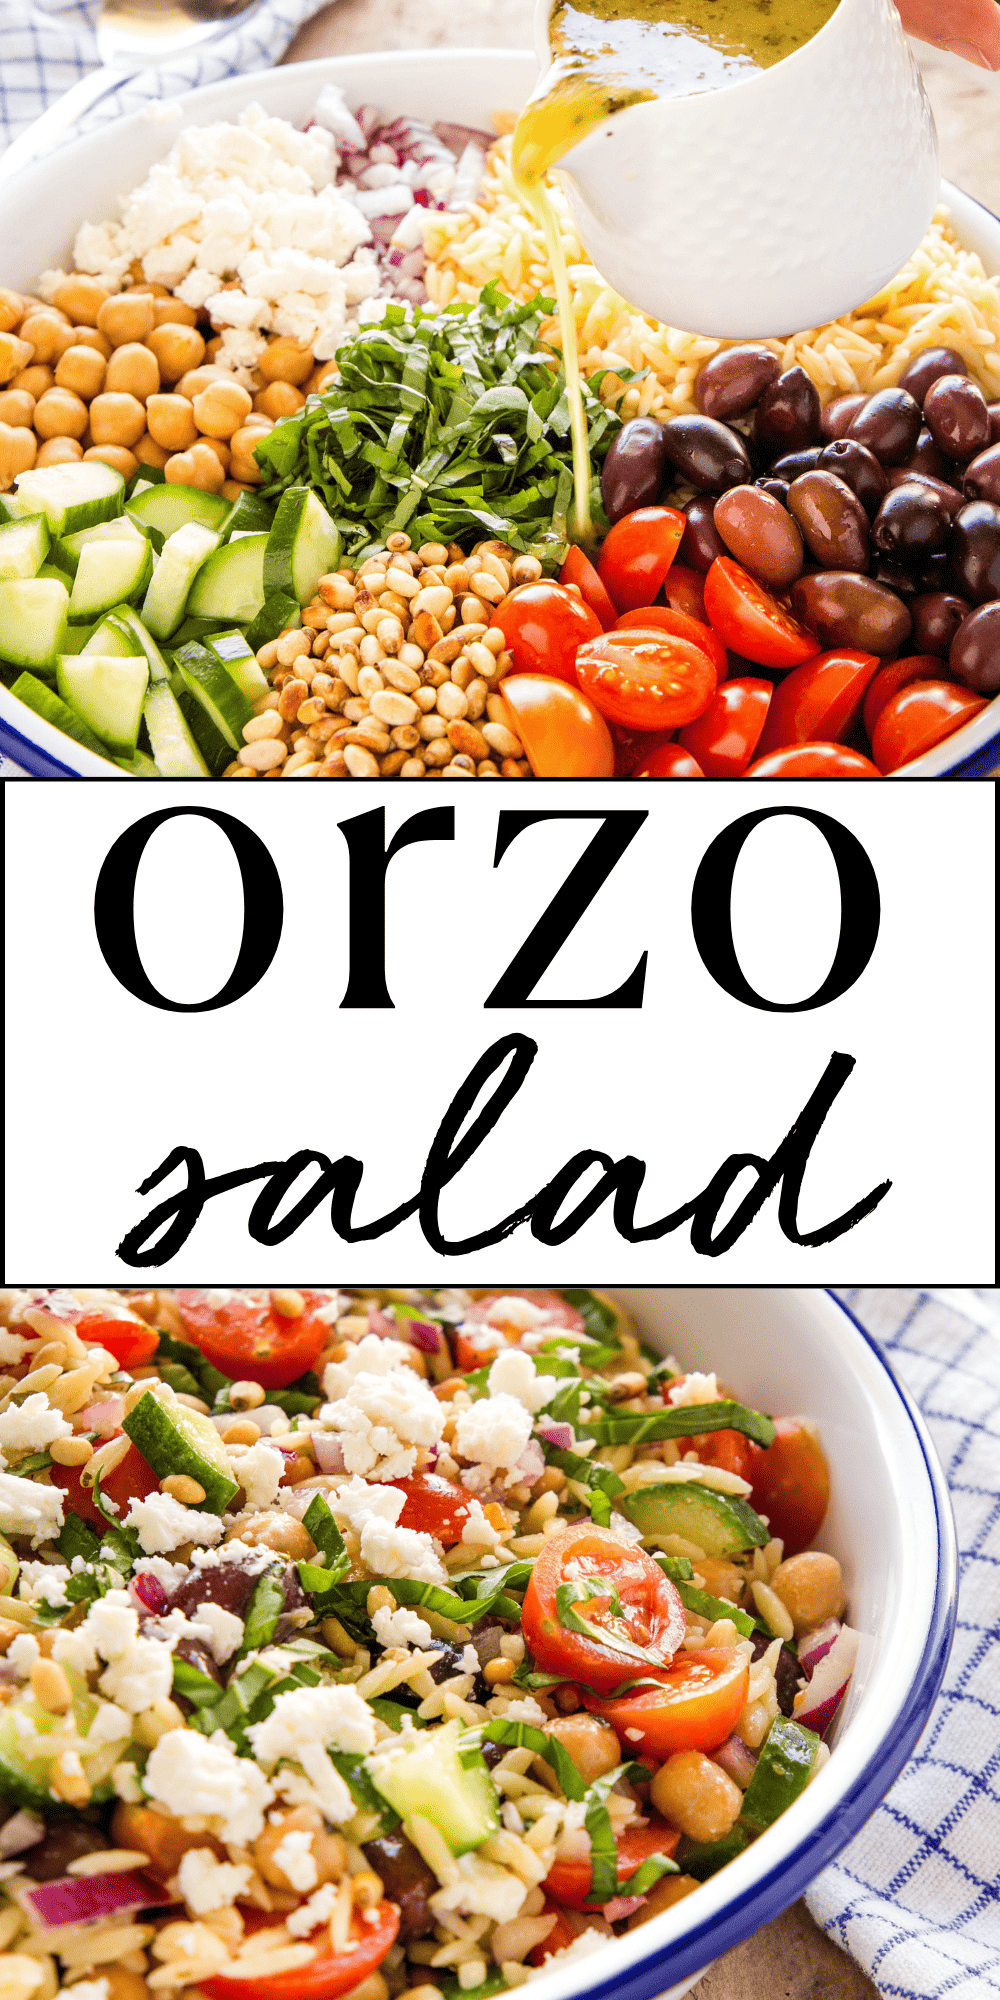 This orzo pasta salad recipe makes the perfect meal prep lunch or dinner. Recipe from thebusybaker.ca! #orzosalad #orzopastasalad #greekorzosalad #mediterraneanorzosalad #orzopasta #healthysalad #lunchsalad via @busybakerblog